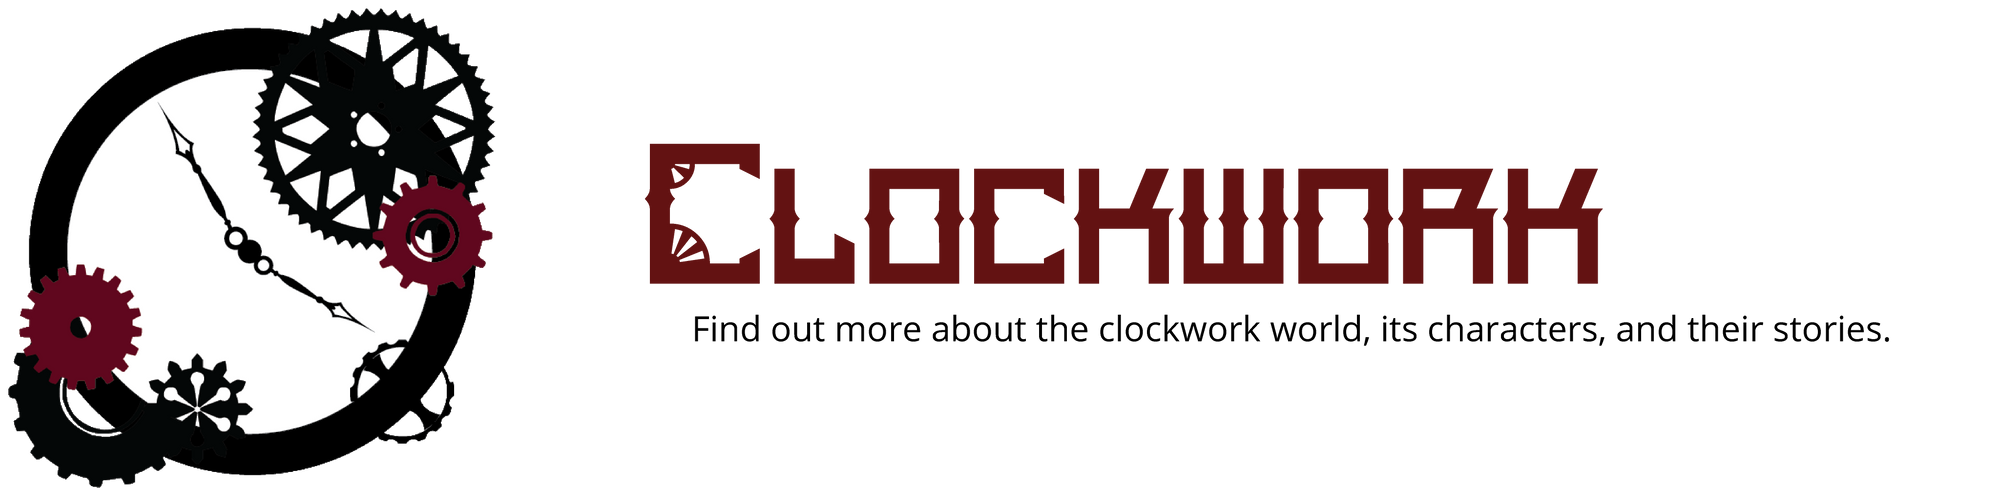 Clockwork: Find out more about the clockwork world, its characters, and their stories.